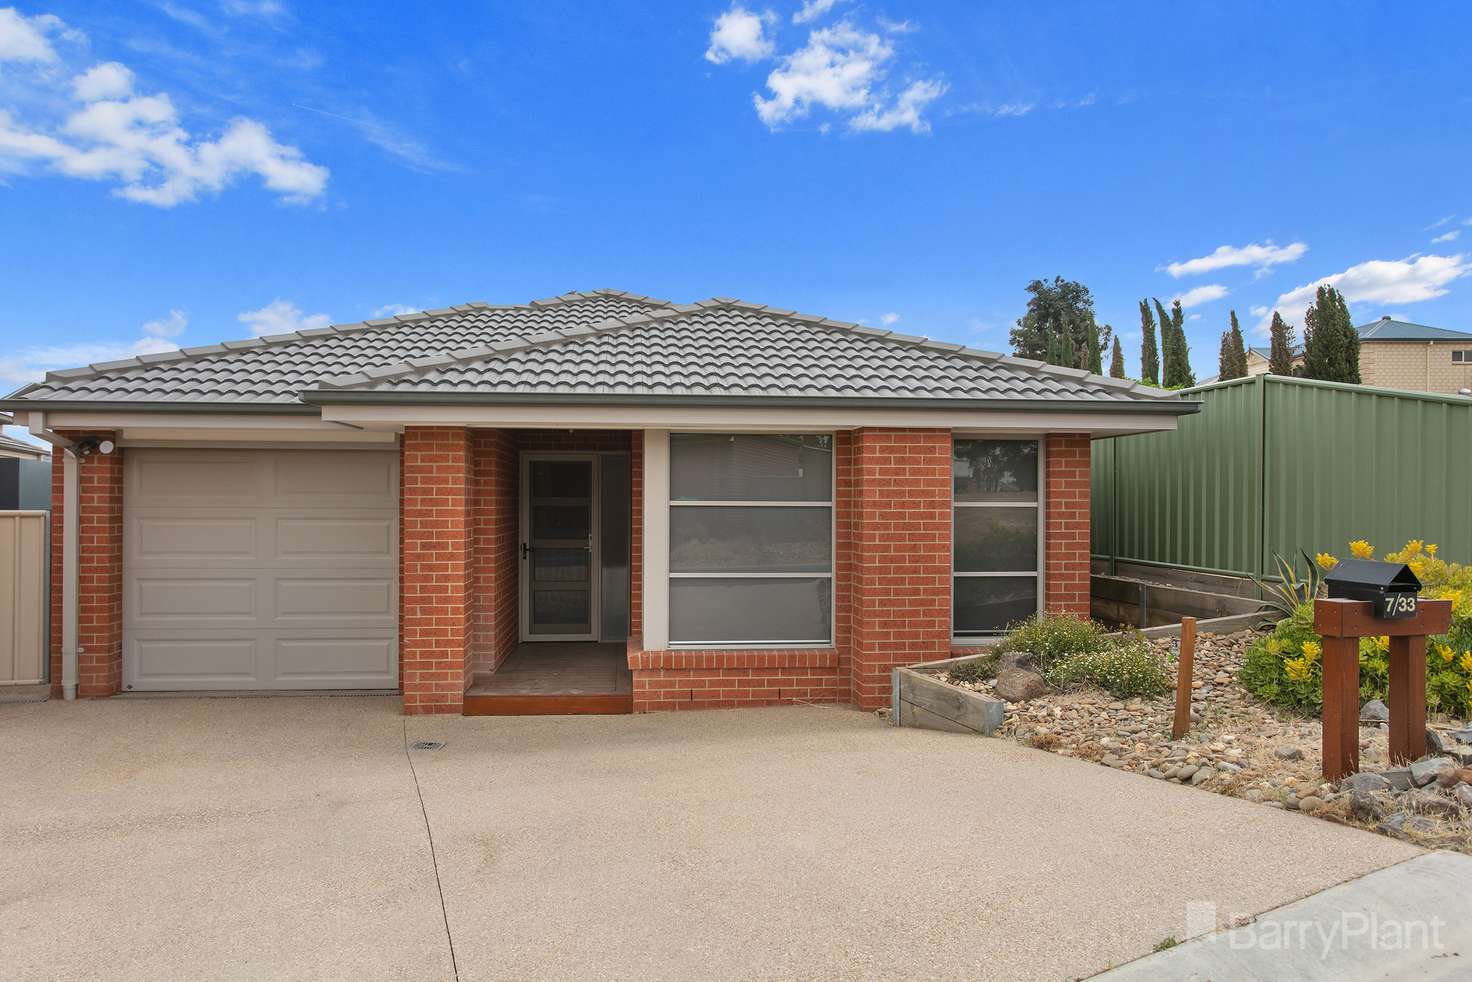 Main view of Homely house listing, 7/33 Strickland Road, East Bendigo VIC 3550